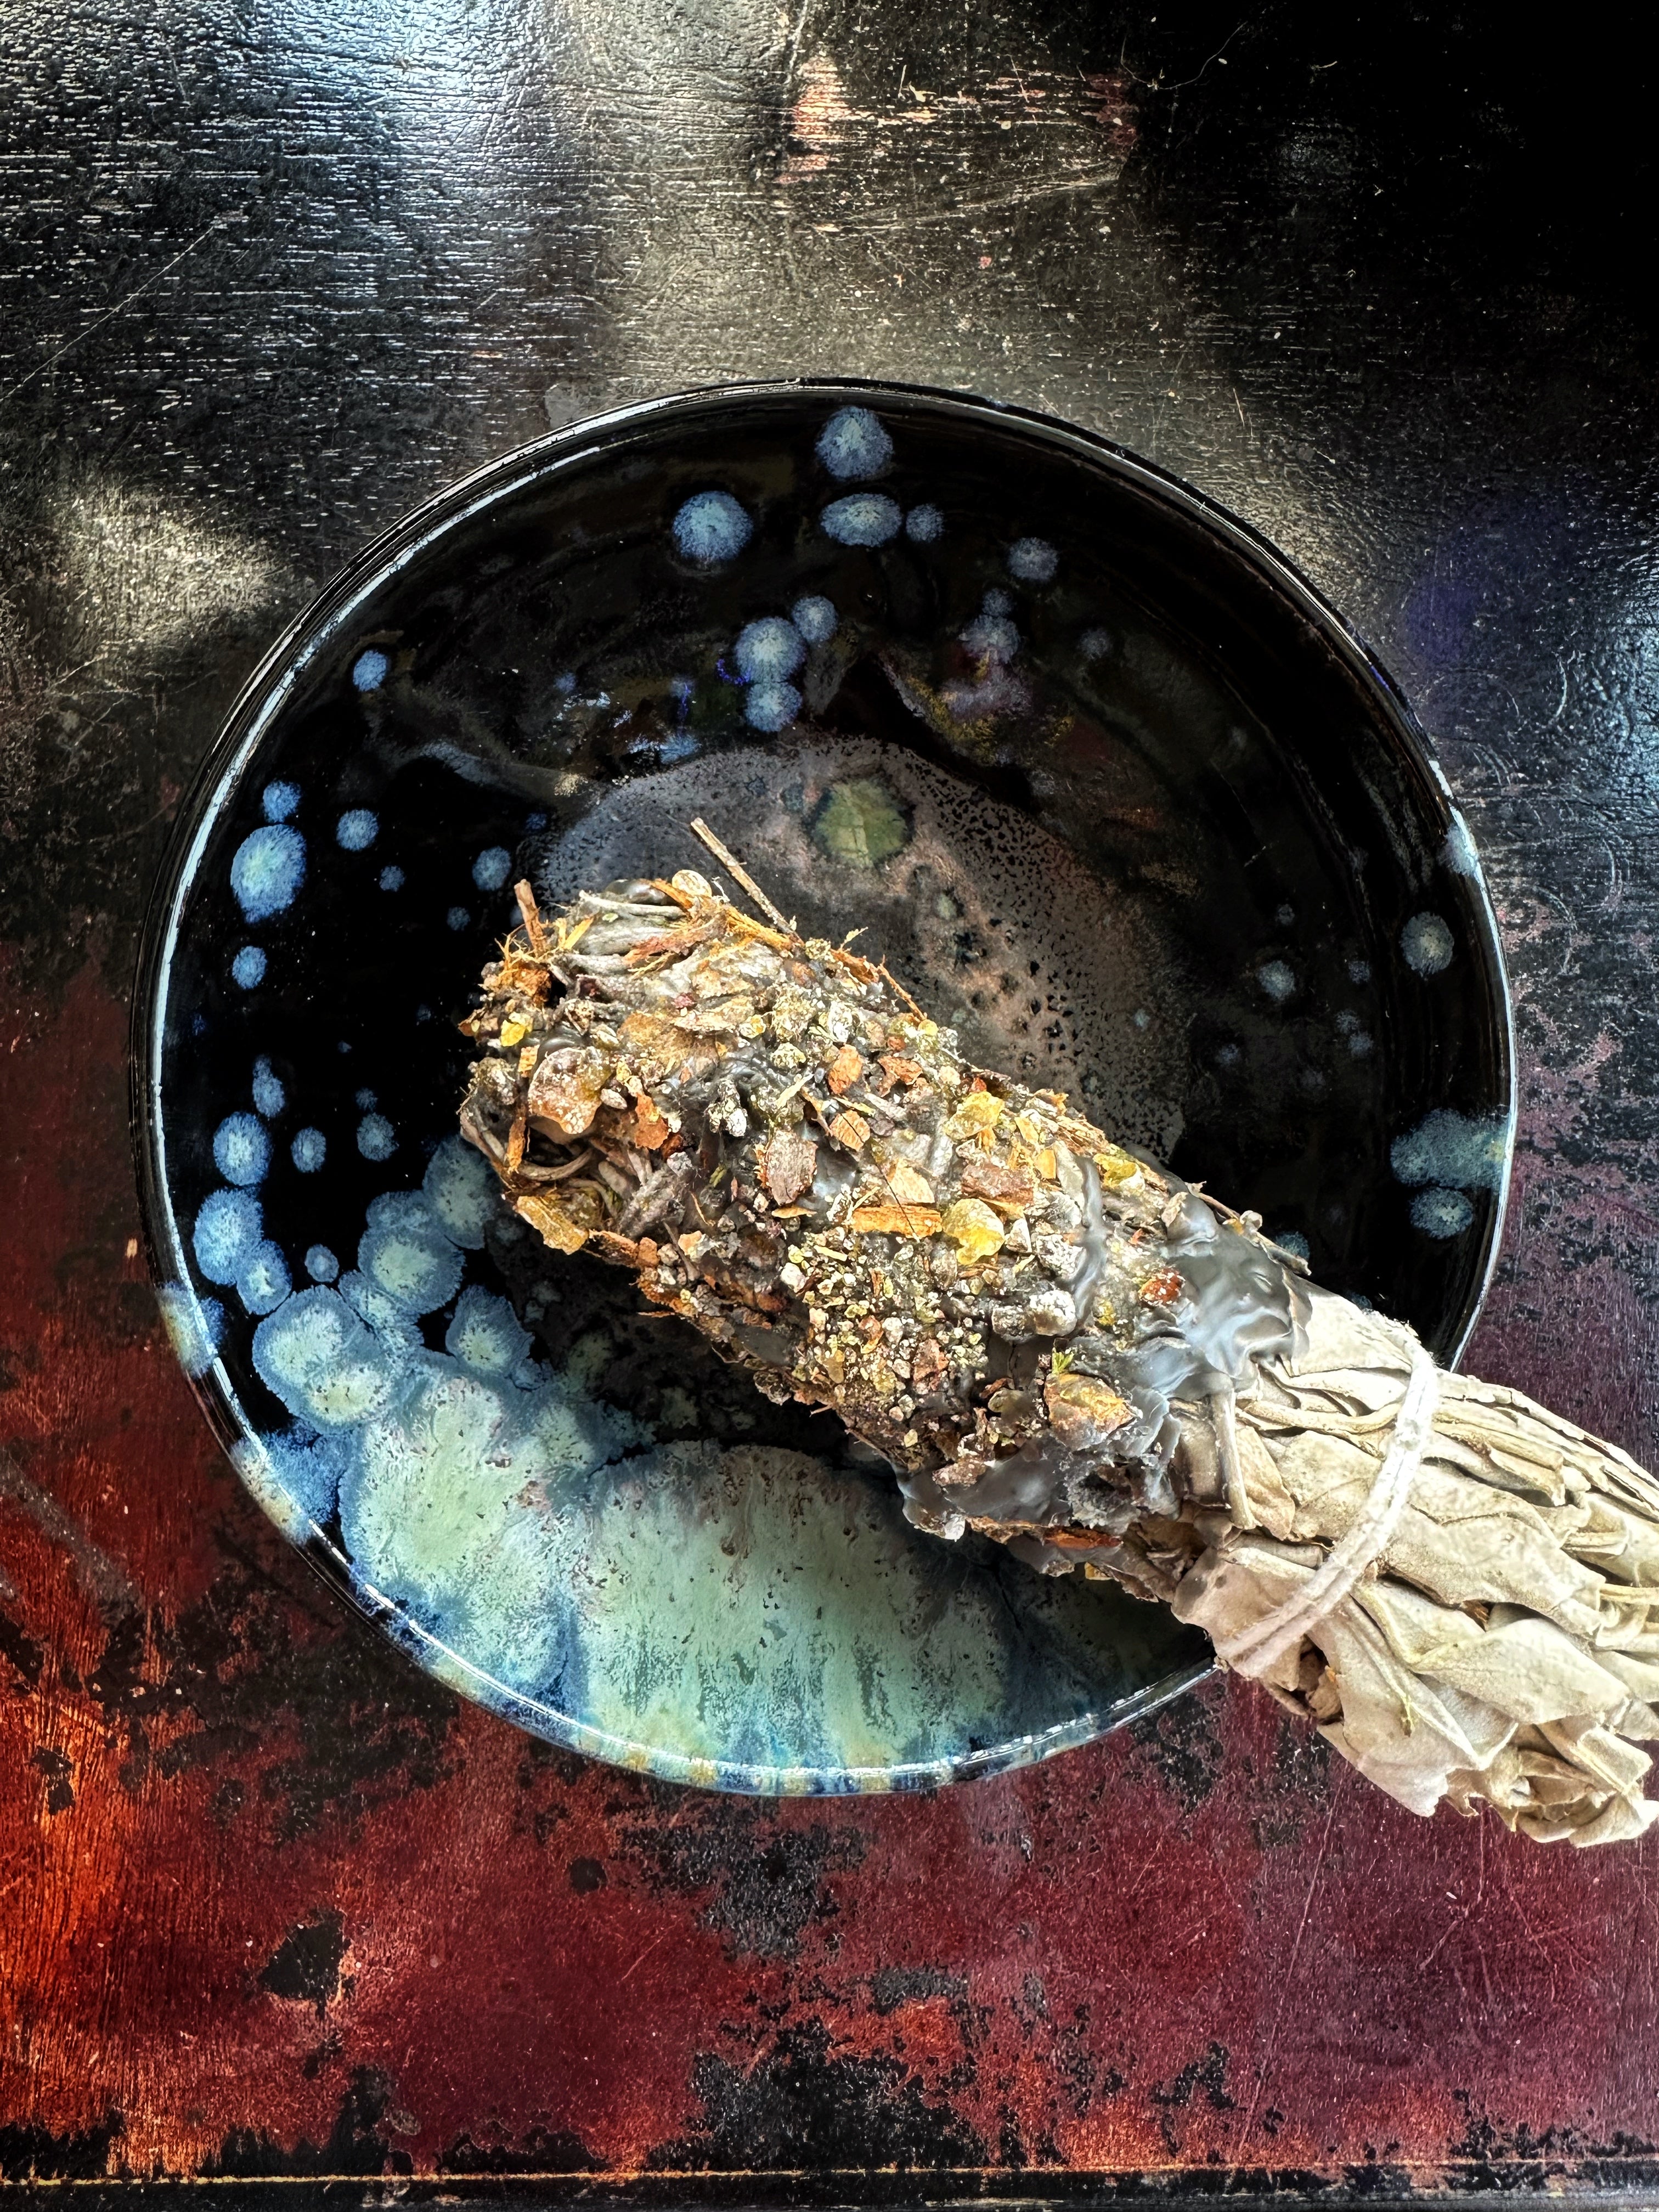 Protection + Cleansing - Herb, Resin, and Beeswax Dipped Sage Bundles